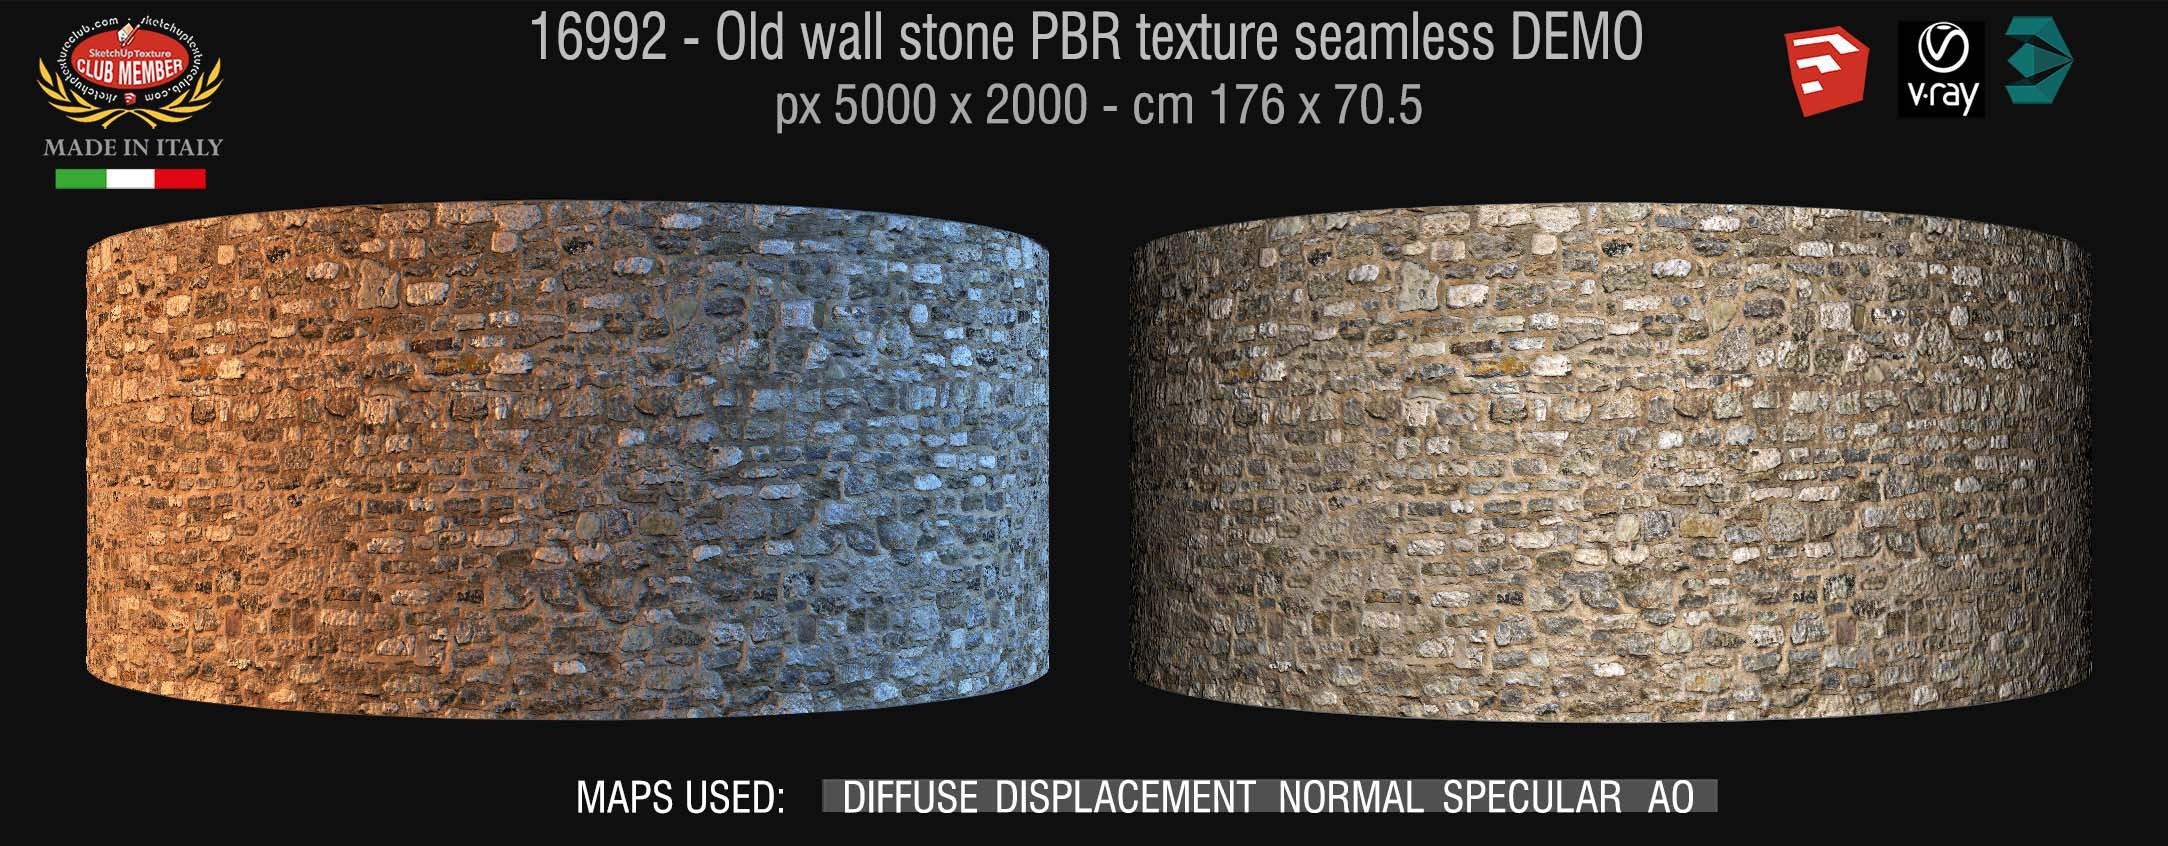 16992 Old Wall stone PBR texture seamless DEMO